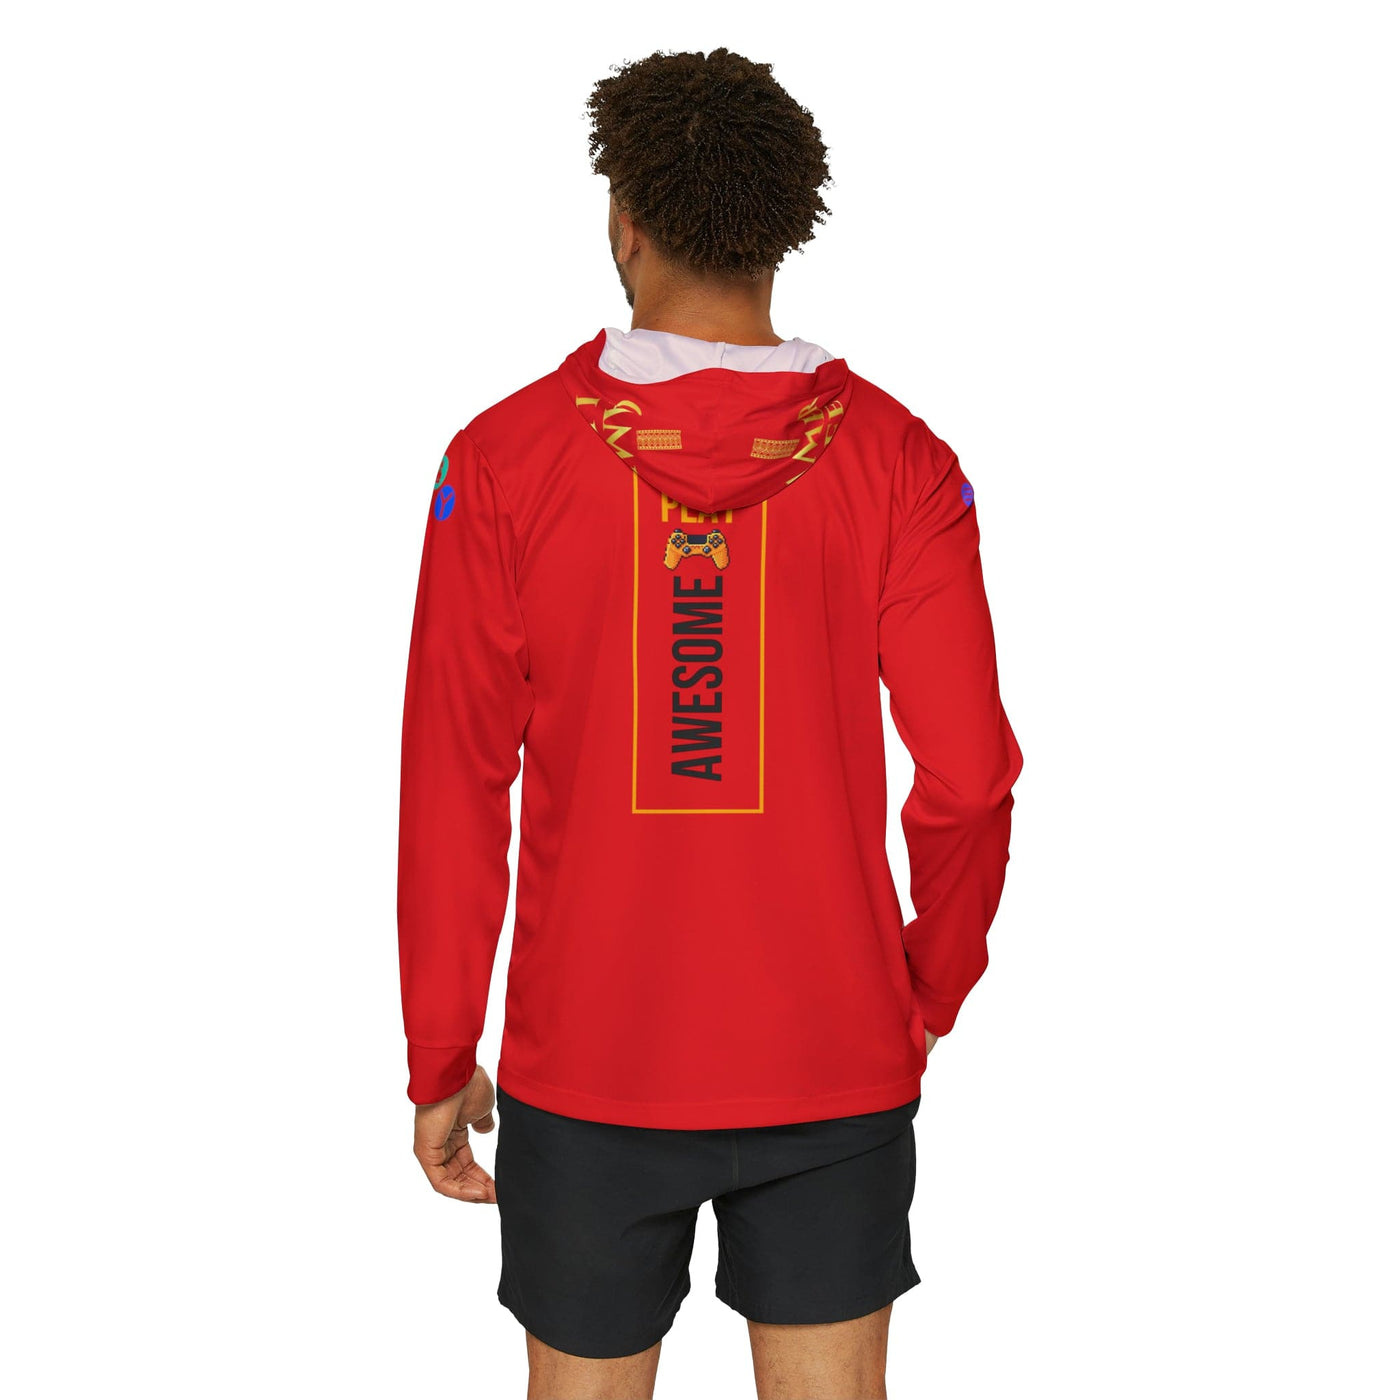 Gamer Fresh Arturo Nuro Collection | Play Awesome | Mortal Kombat 30 Year Anniversary | Raw Paw Limited Edition Tribute | Athletic Warmup Red Hoodie